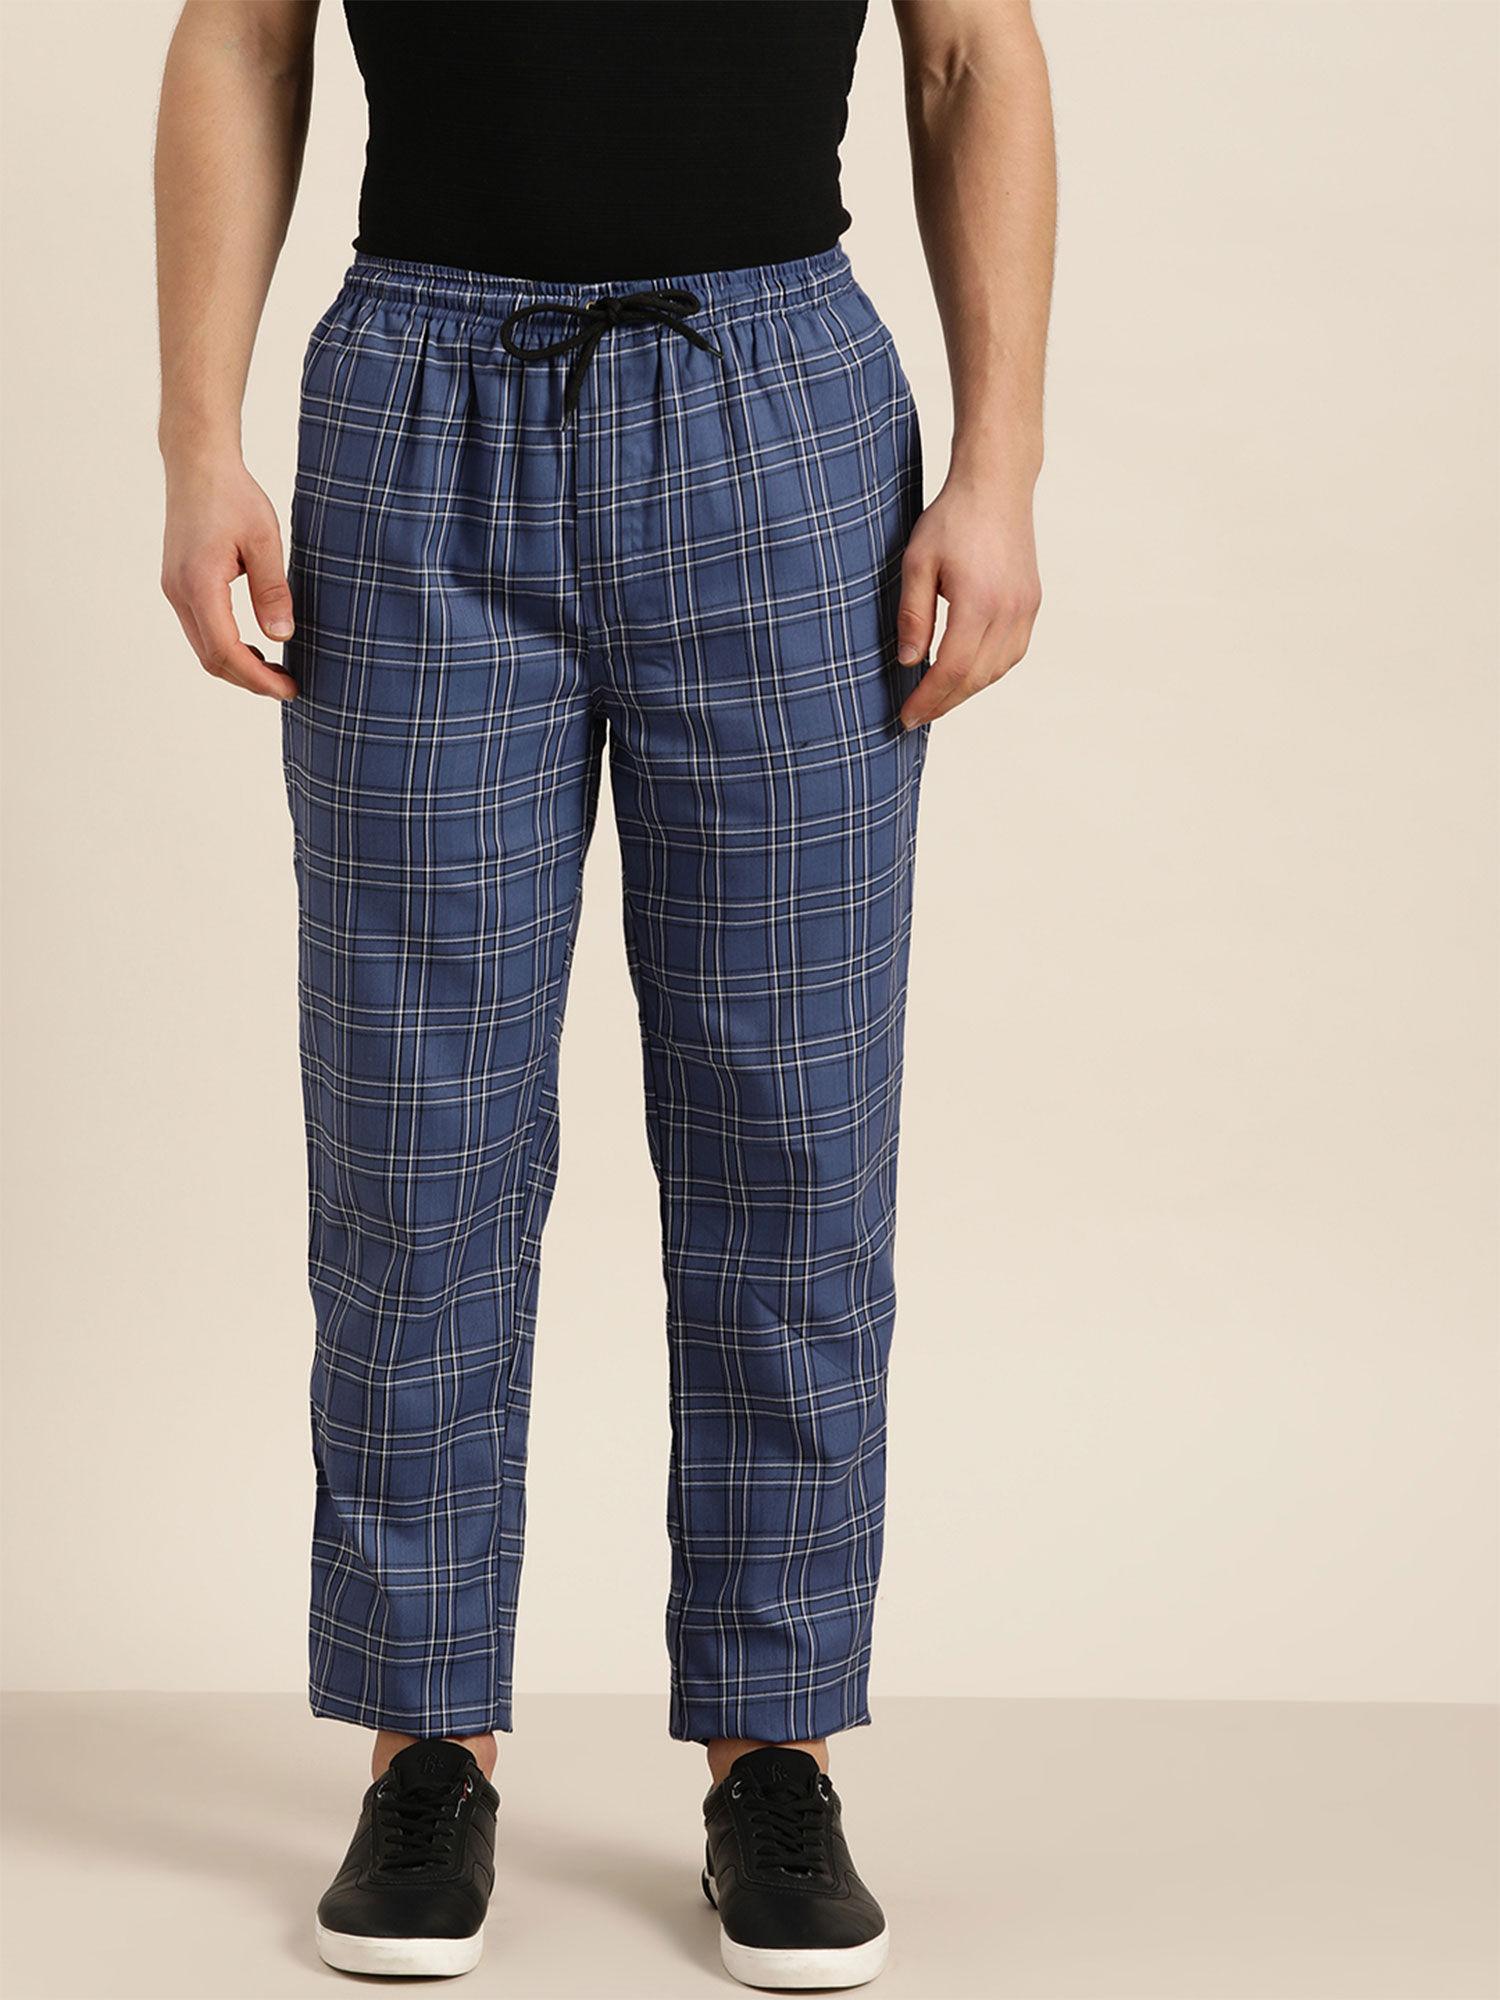 cotton navy blue & white checked track pant